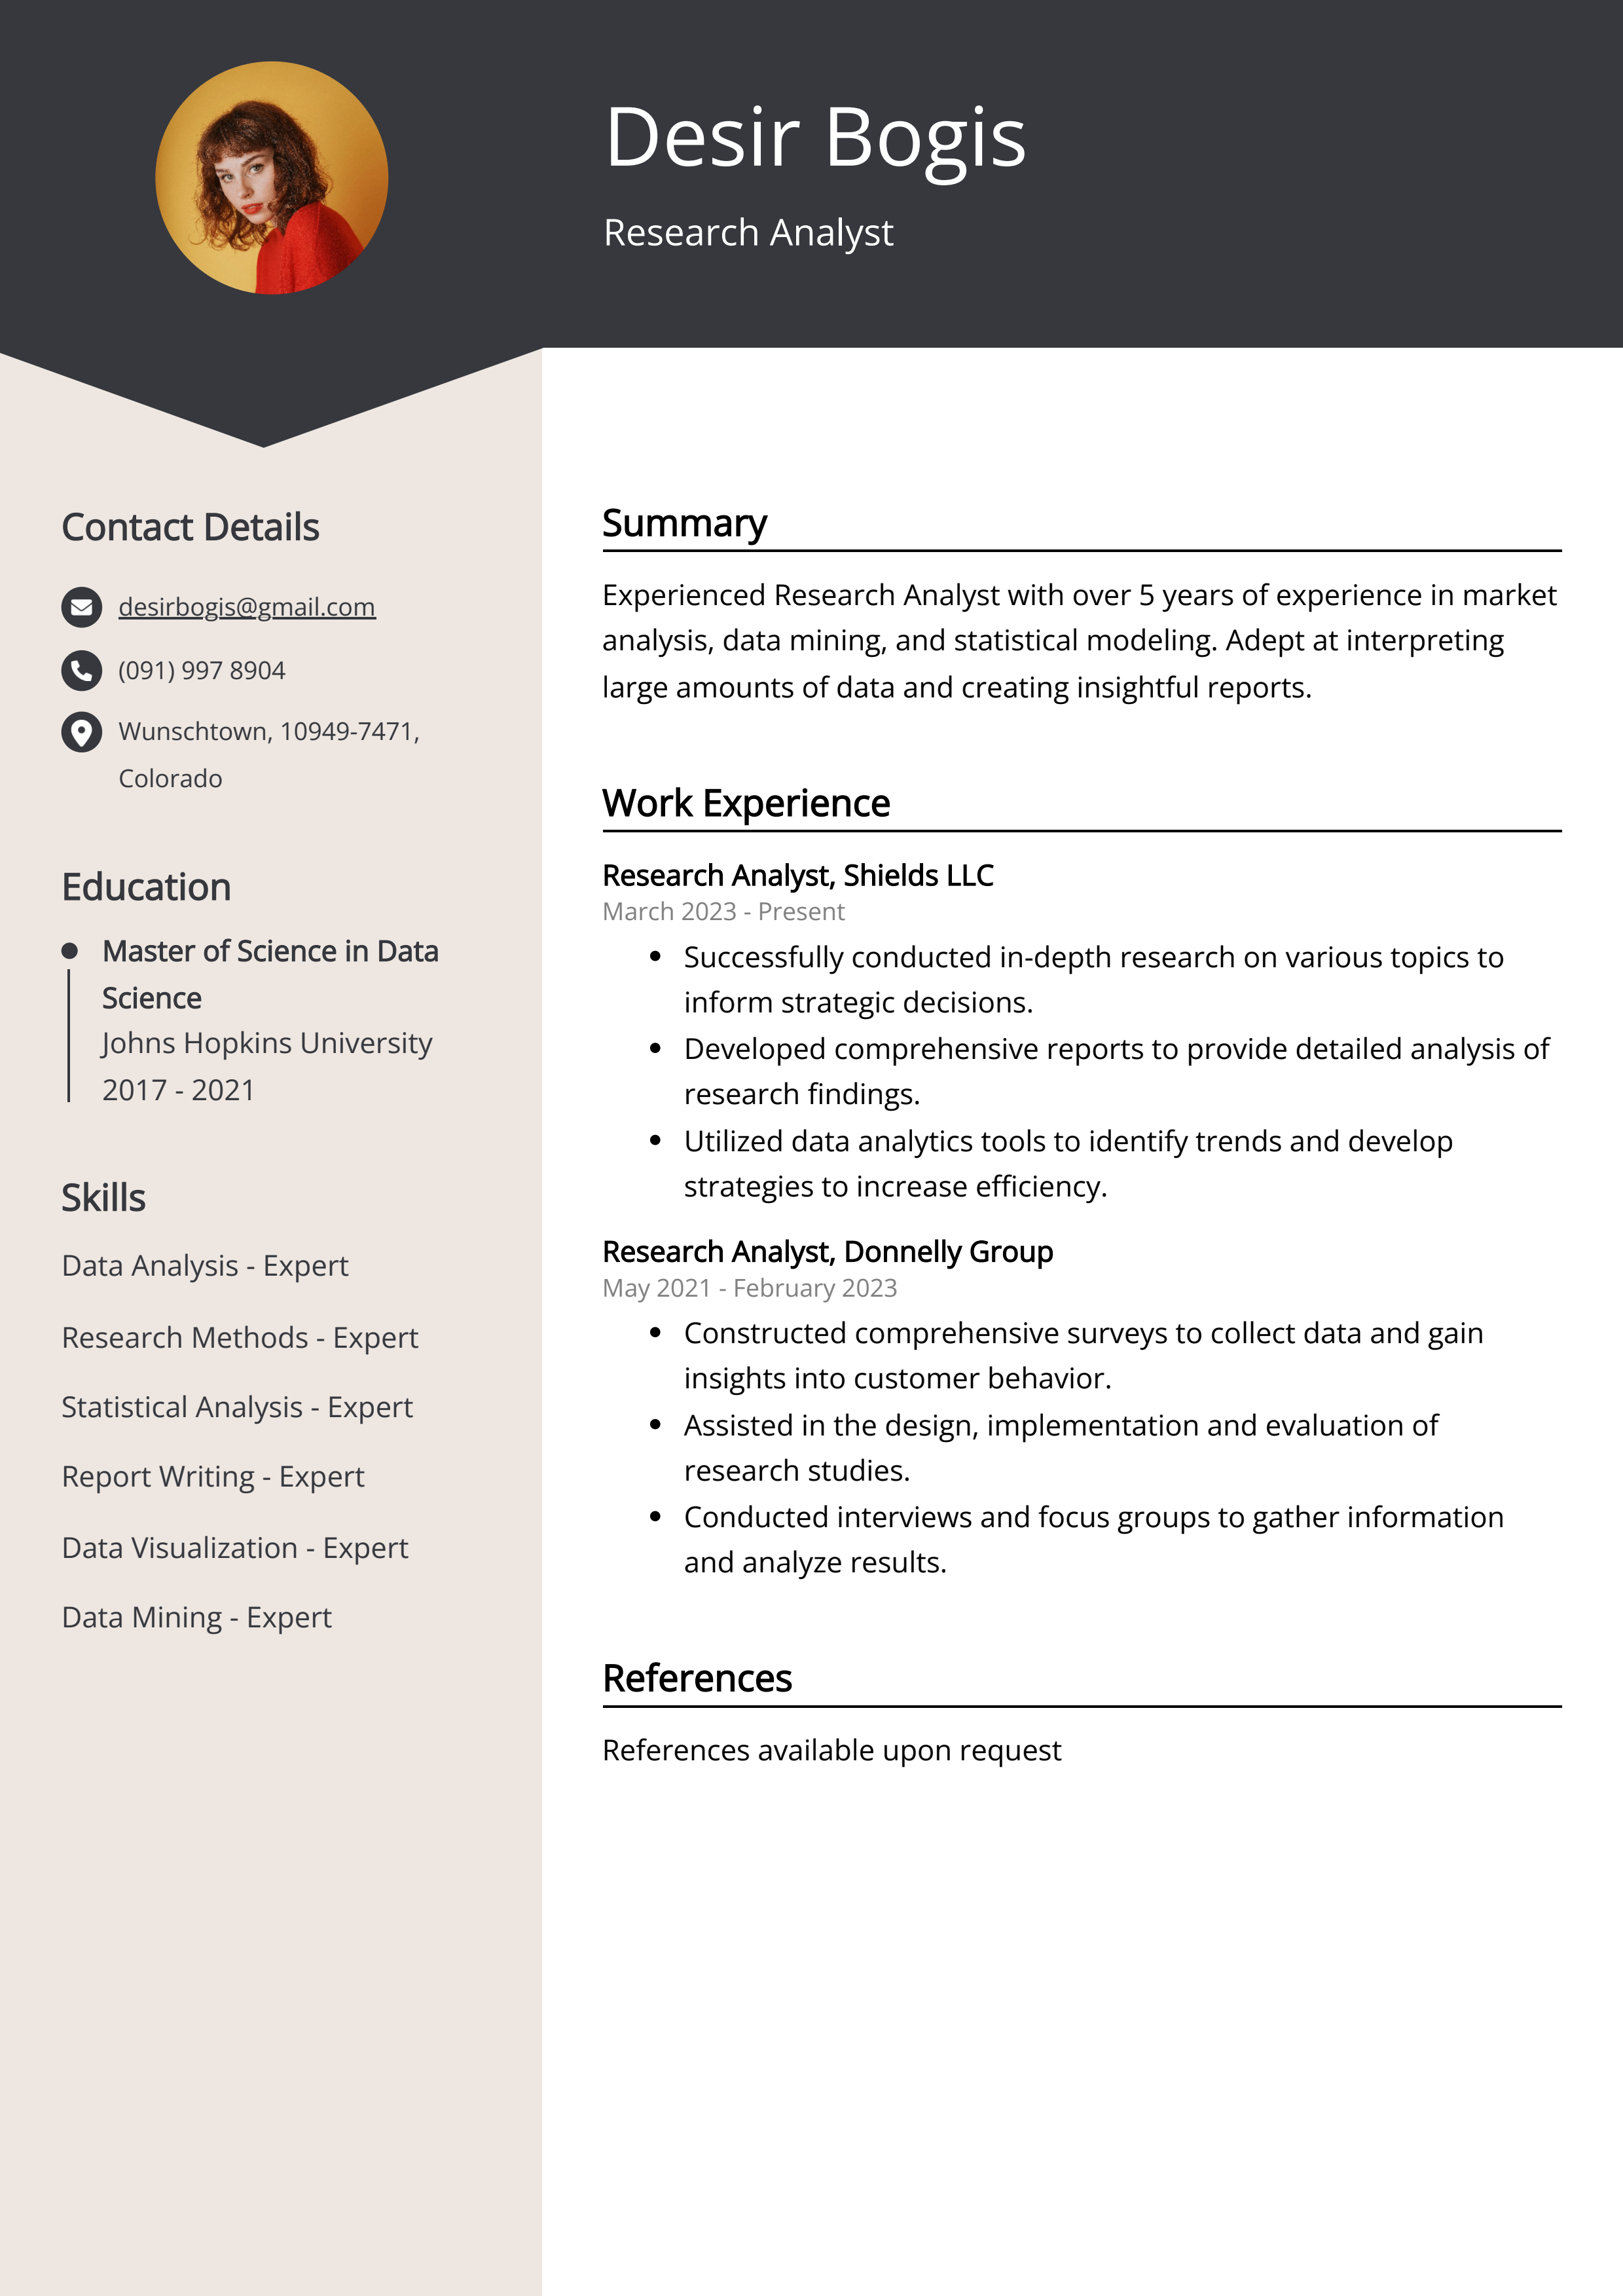 Research Analyst CV Example